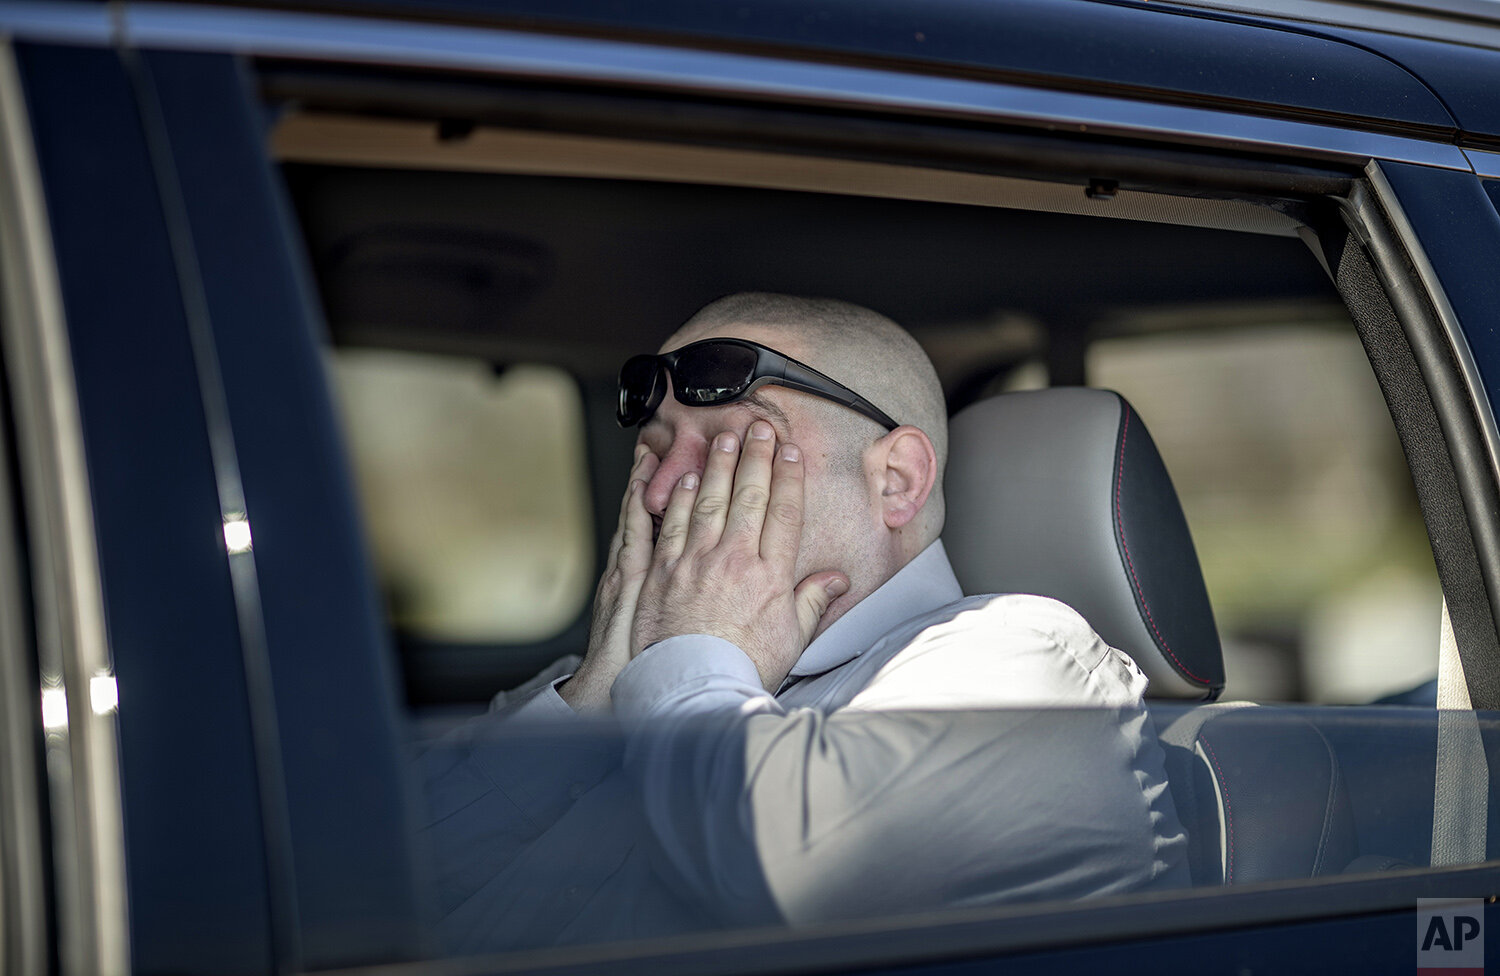  Jason Boxer wipes away tears while observing from the car the burial of his father, Allen Boxer, at Mount Richmond Cemetery in the Staten Island borough of New York, Sunday, April 12, 2020. "He was kind and gentle and had the biggest heart of anyone